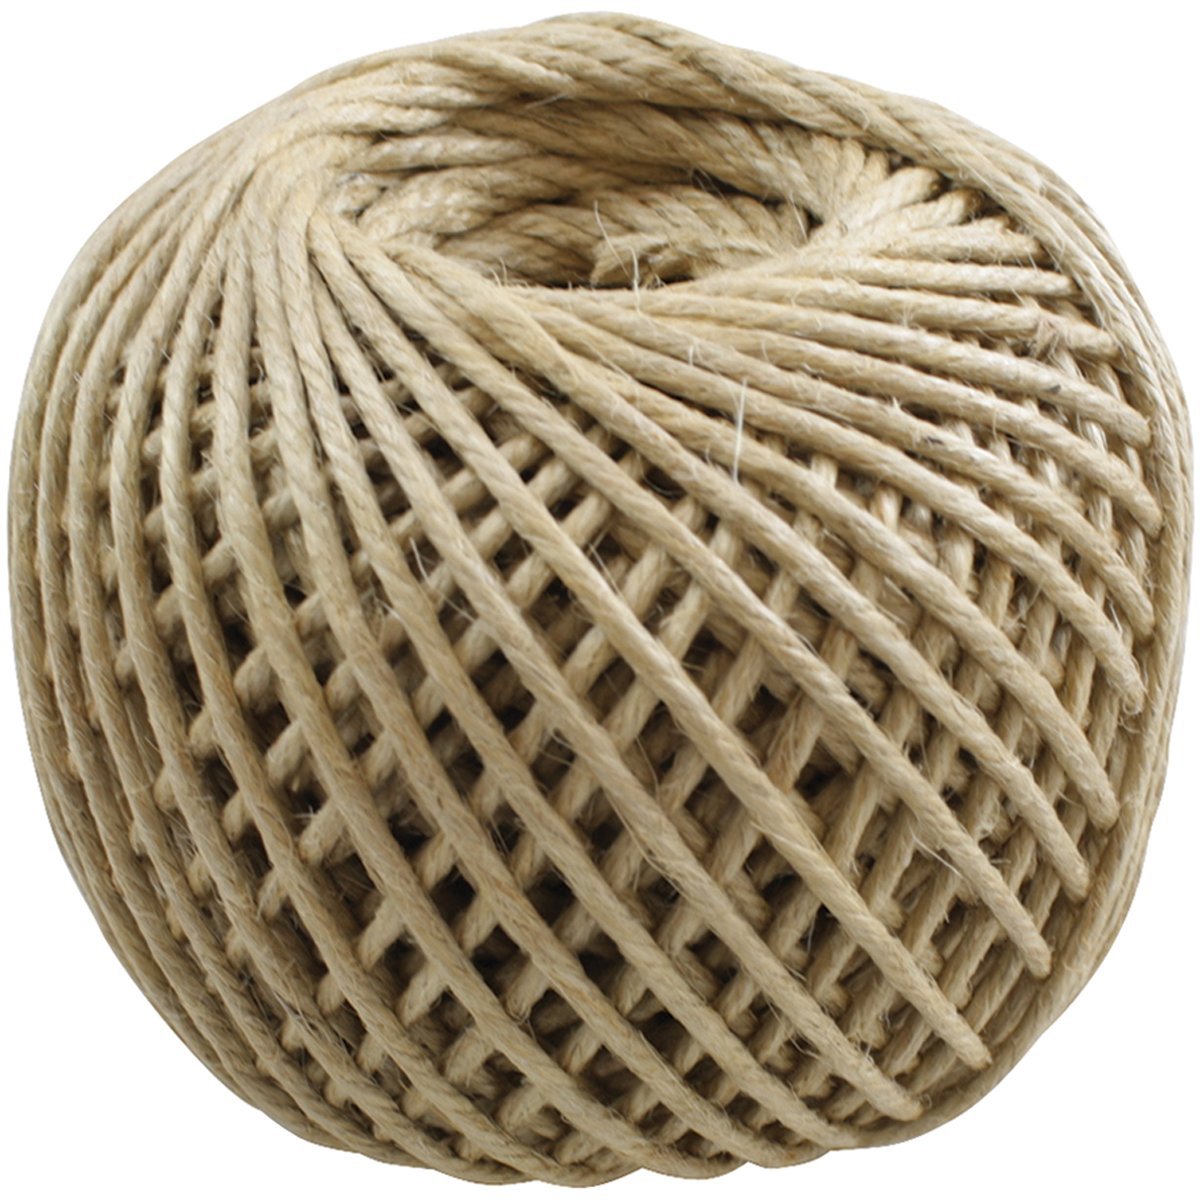 Natural Jute Twine 4-Ply Ball Shape 100 Yards - Click Image to Close